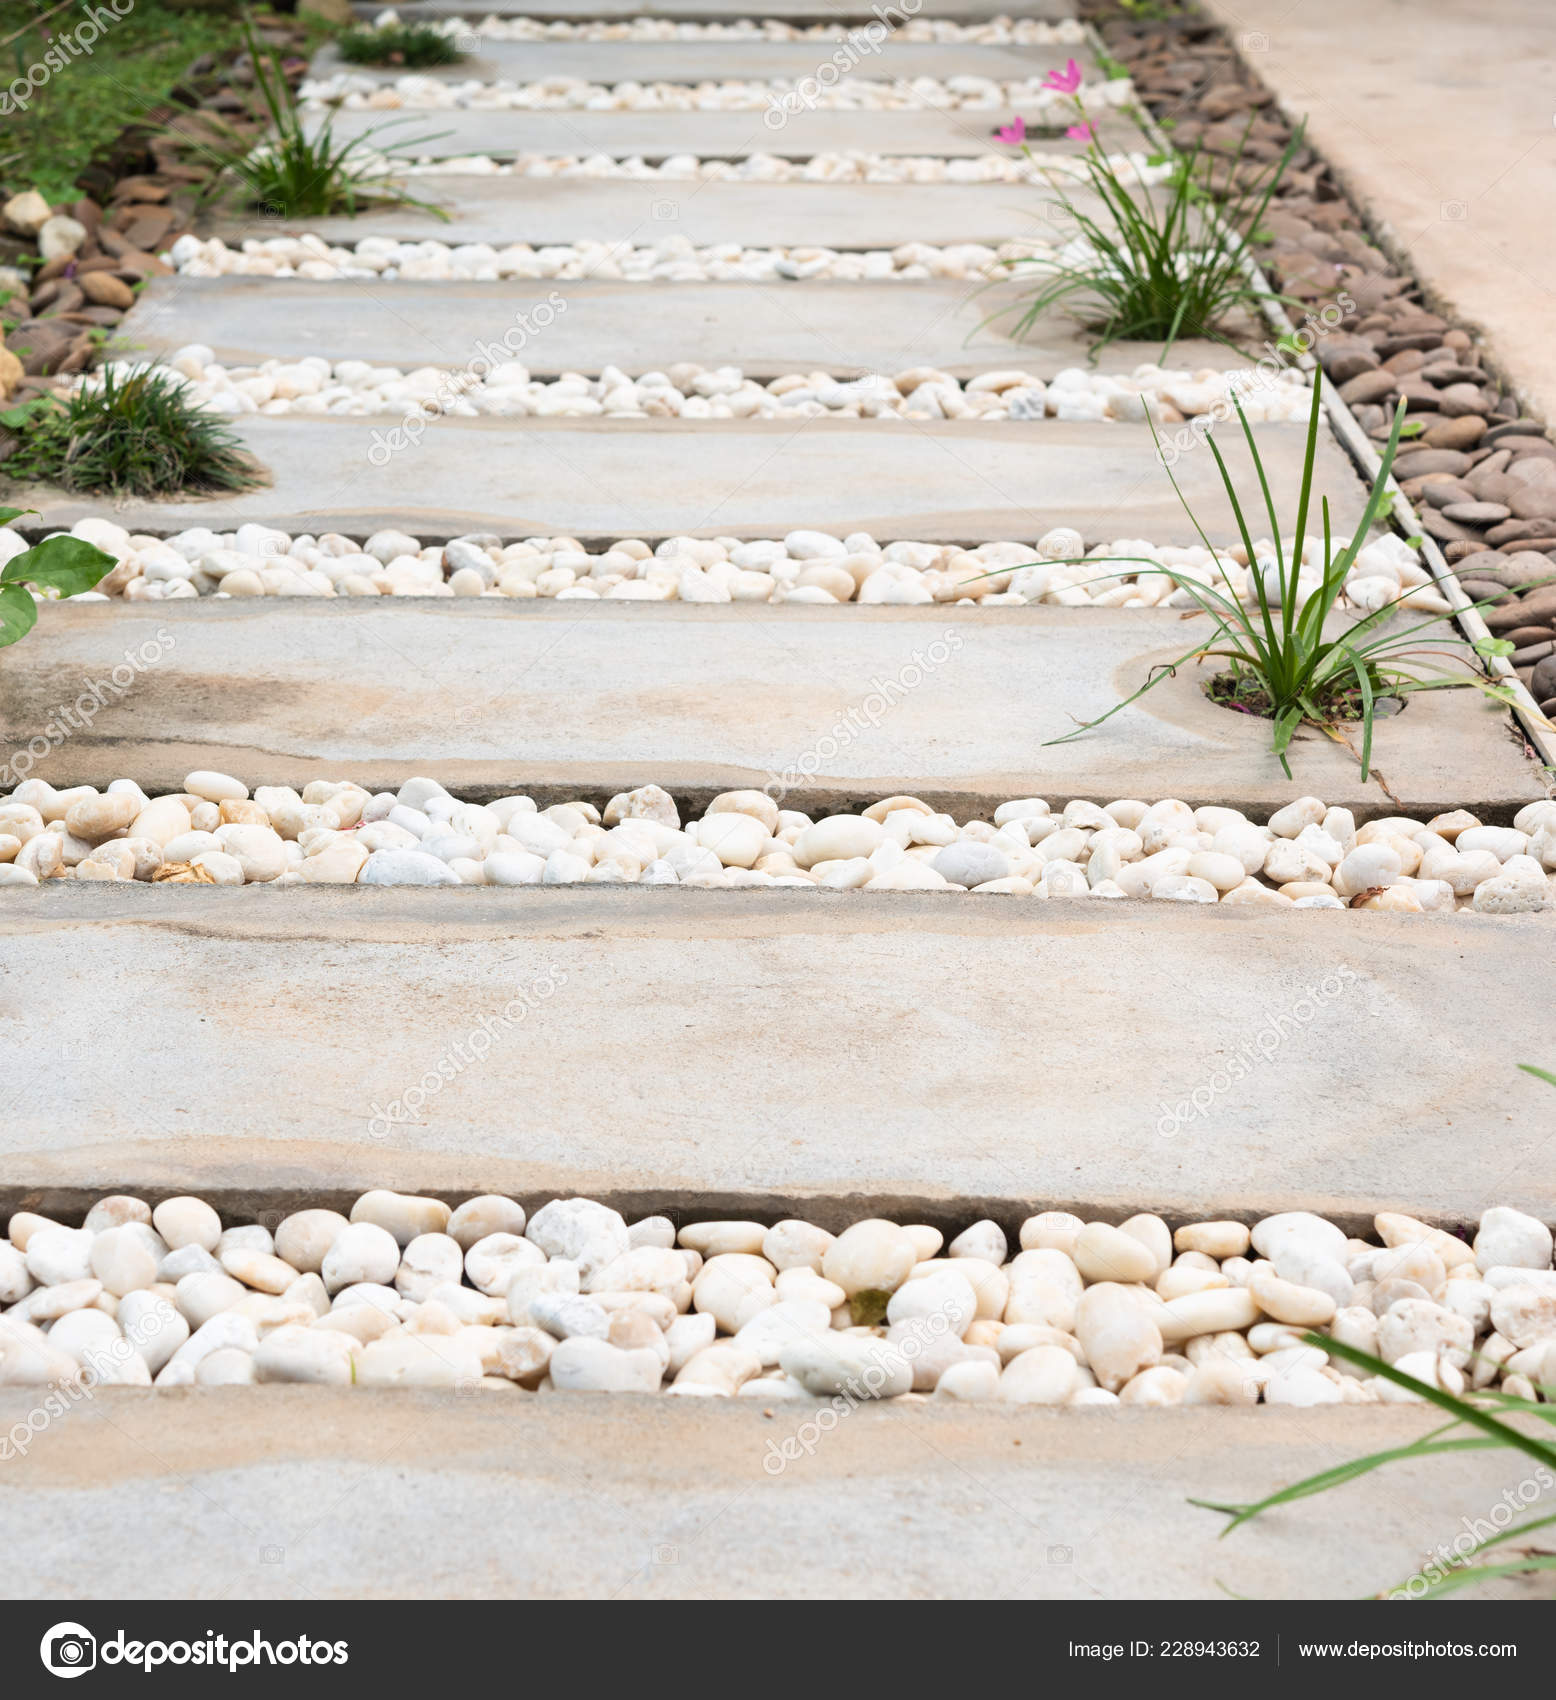 Landscaping Modern Simple Stone Pathway, White Gravel Landscaping